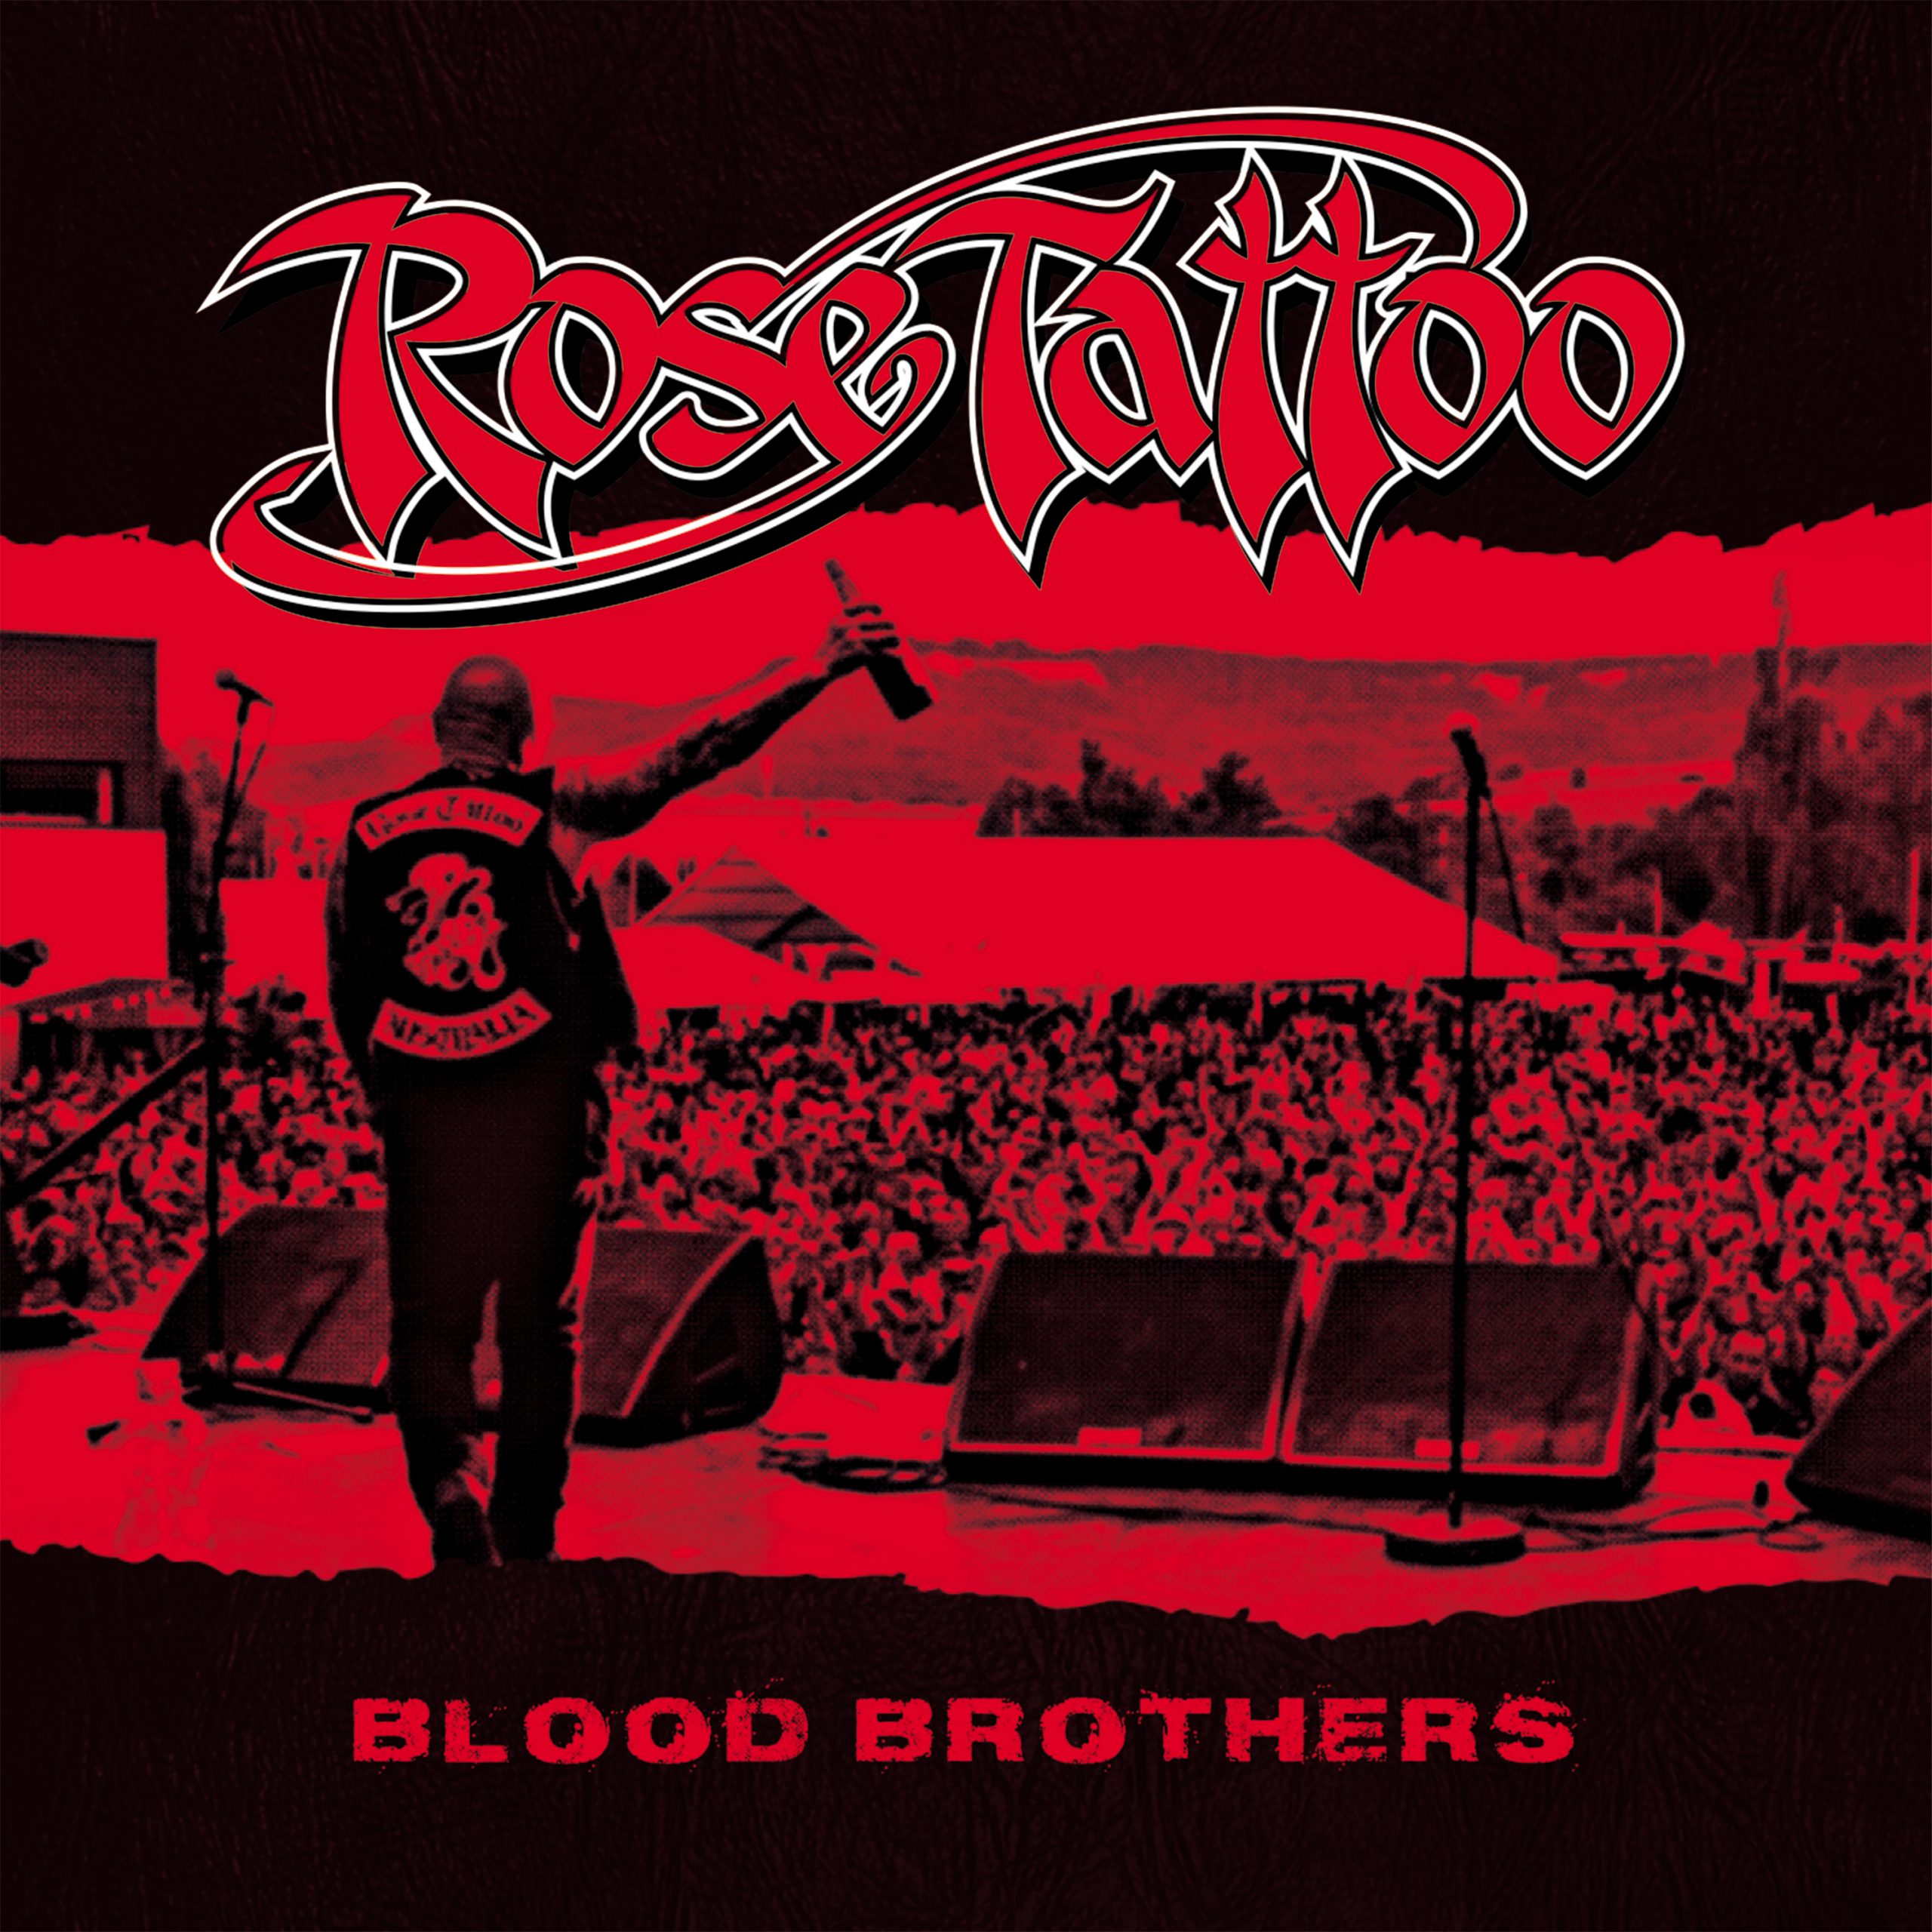 Rose Tattoo Blood brothers 2007